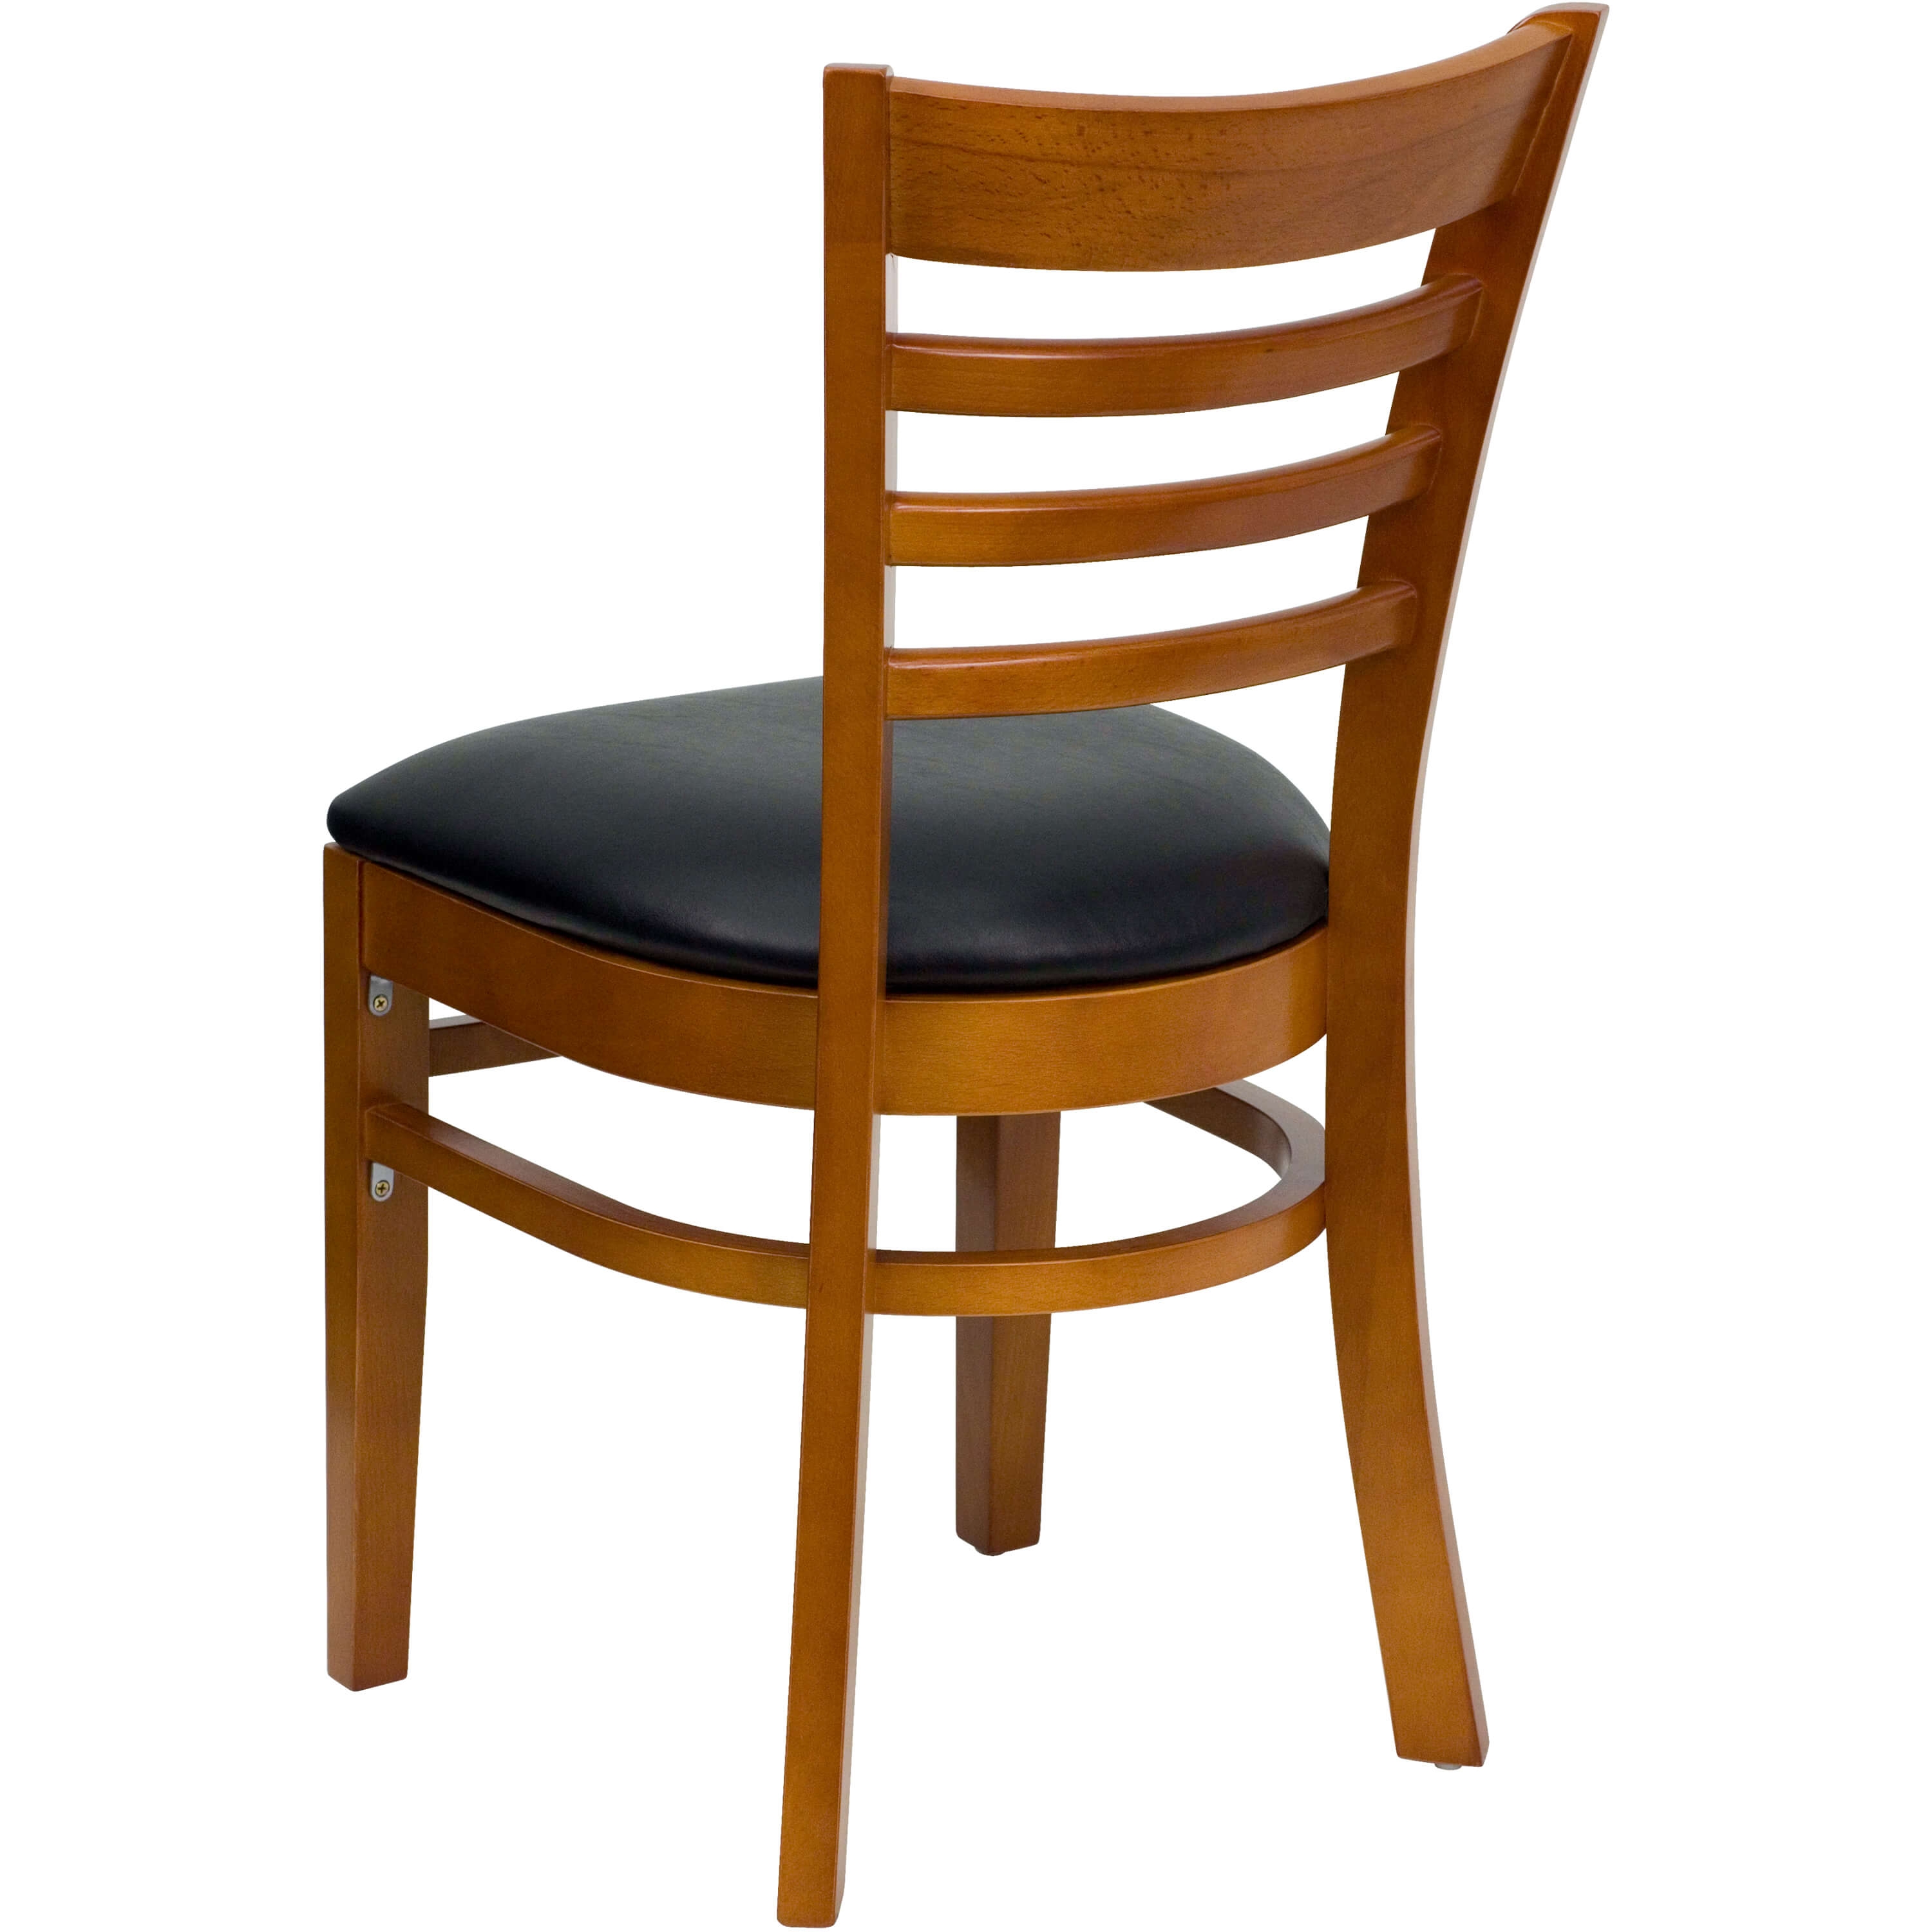 Ladder back wooden dining chair back view